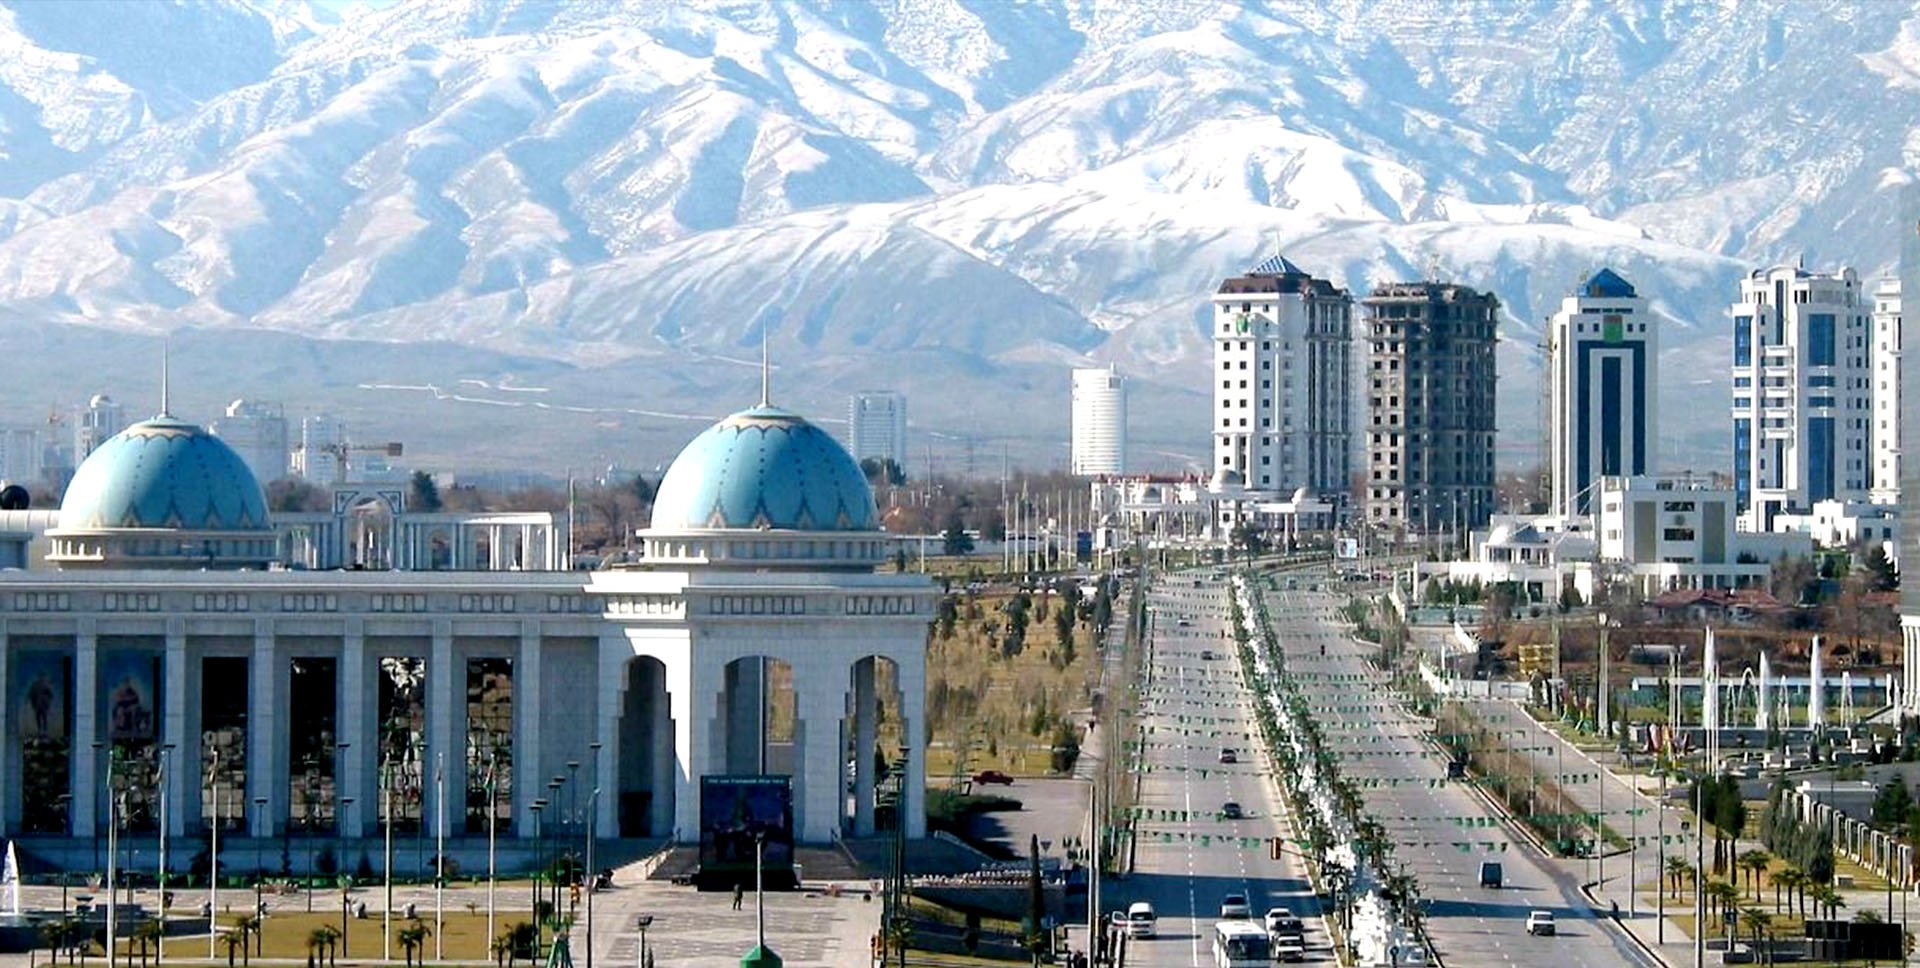 Do you know the sights of Turkmenistan?